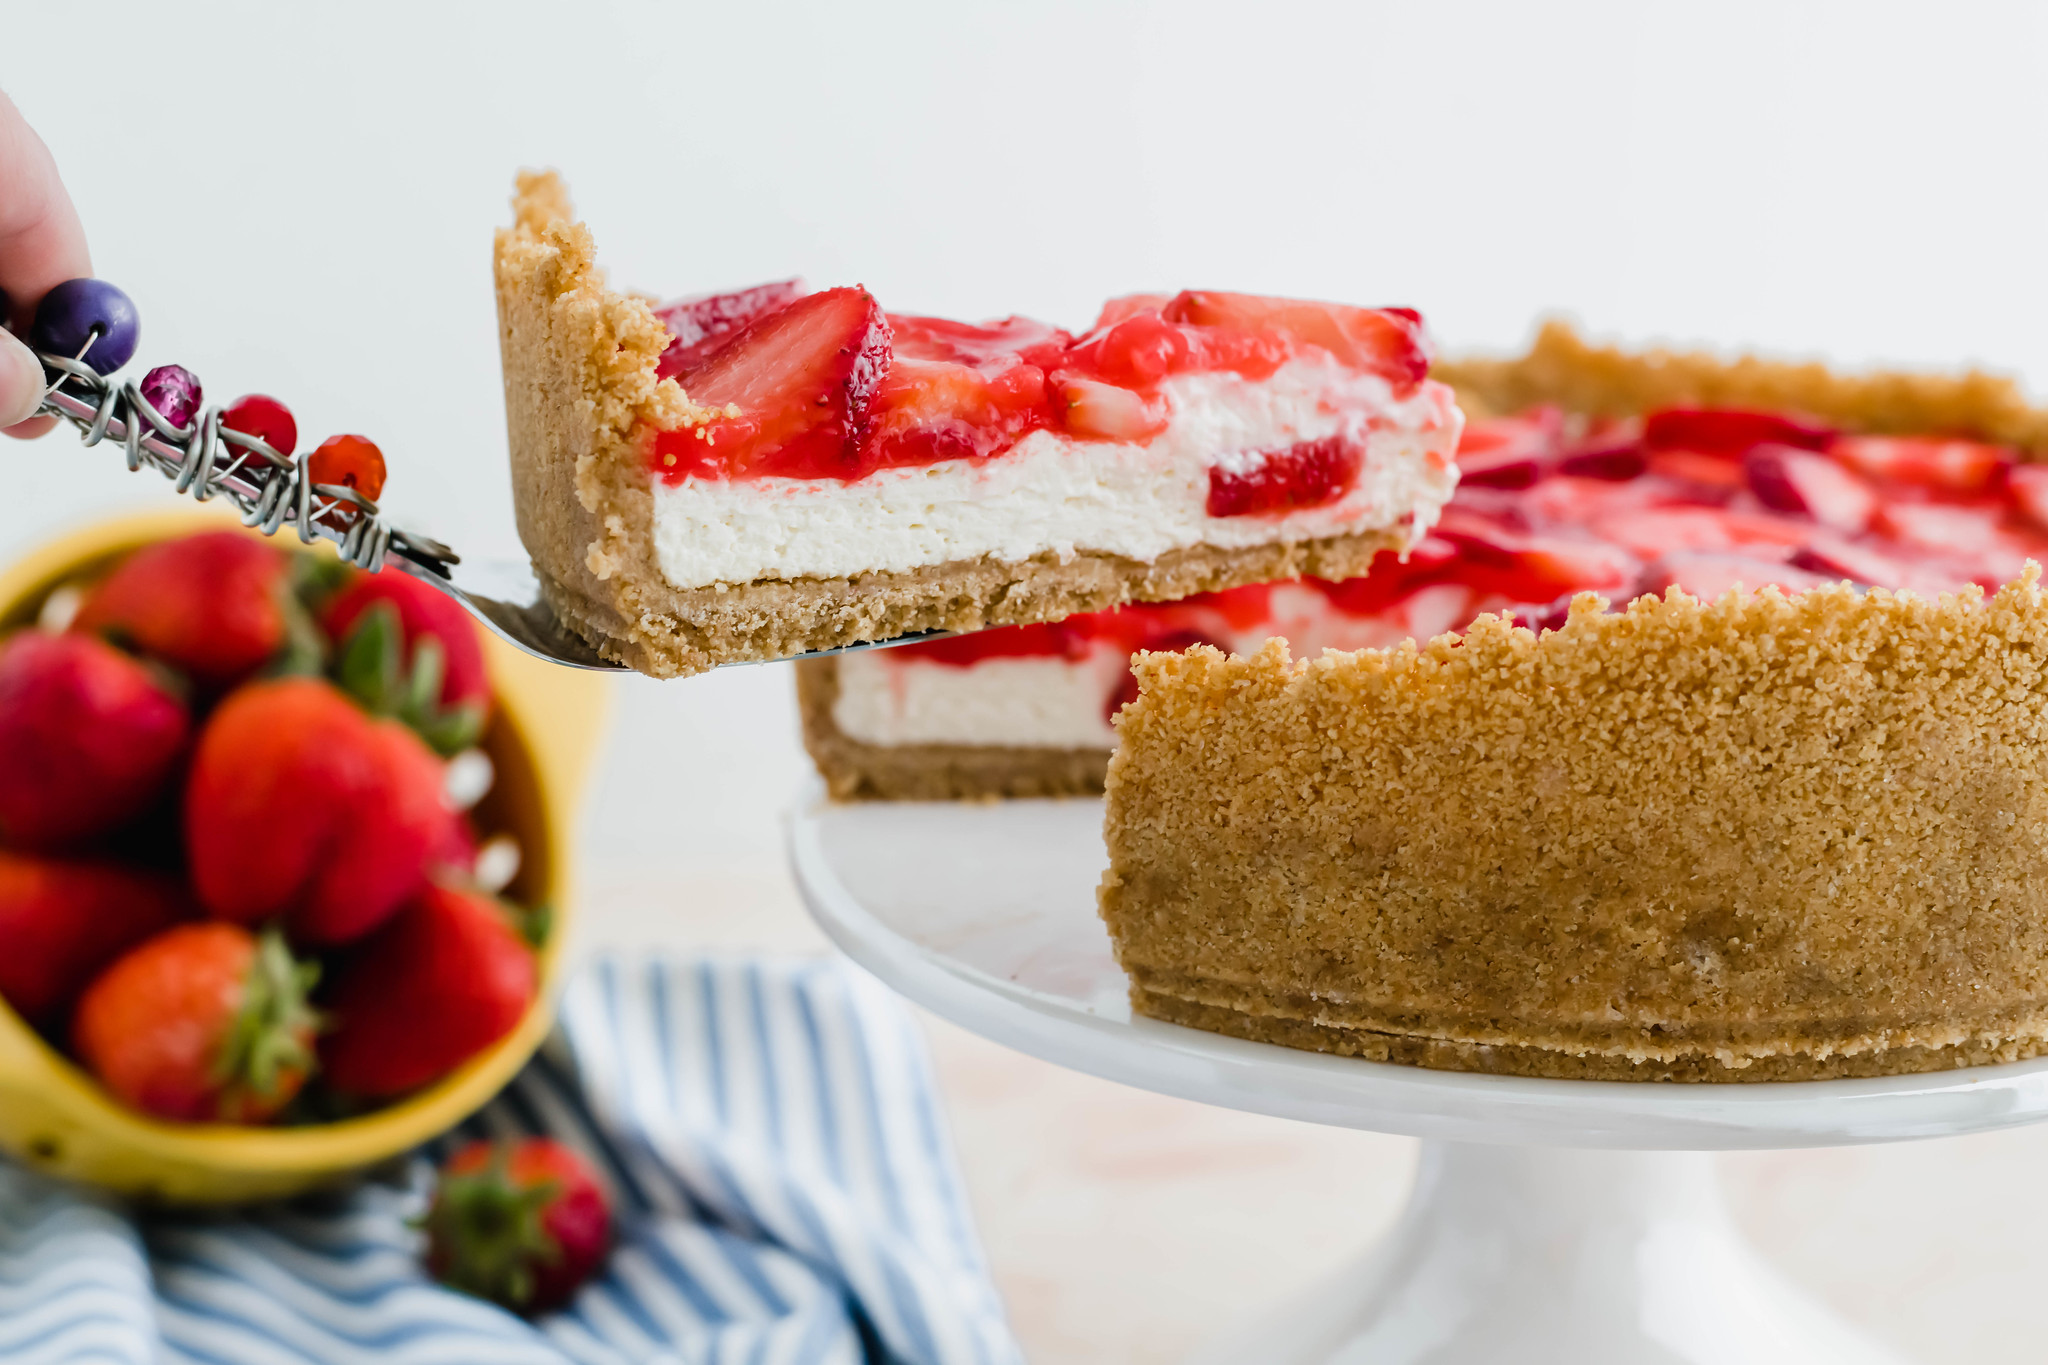 I combined two favorite summer desserts, cheesecake and strawberry pie, to make the most delicious treat, Strawberry Cream Cheese Pie. A fluffy, no-bake cheesecake filling topped with classic strawberry pie filling will have you addicted in no time.